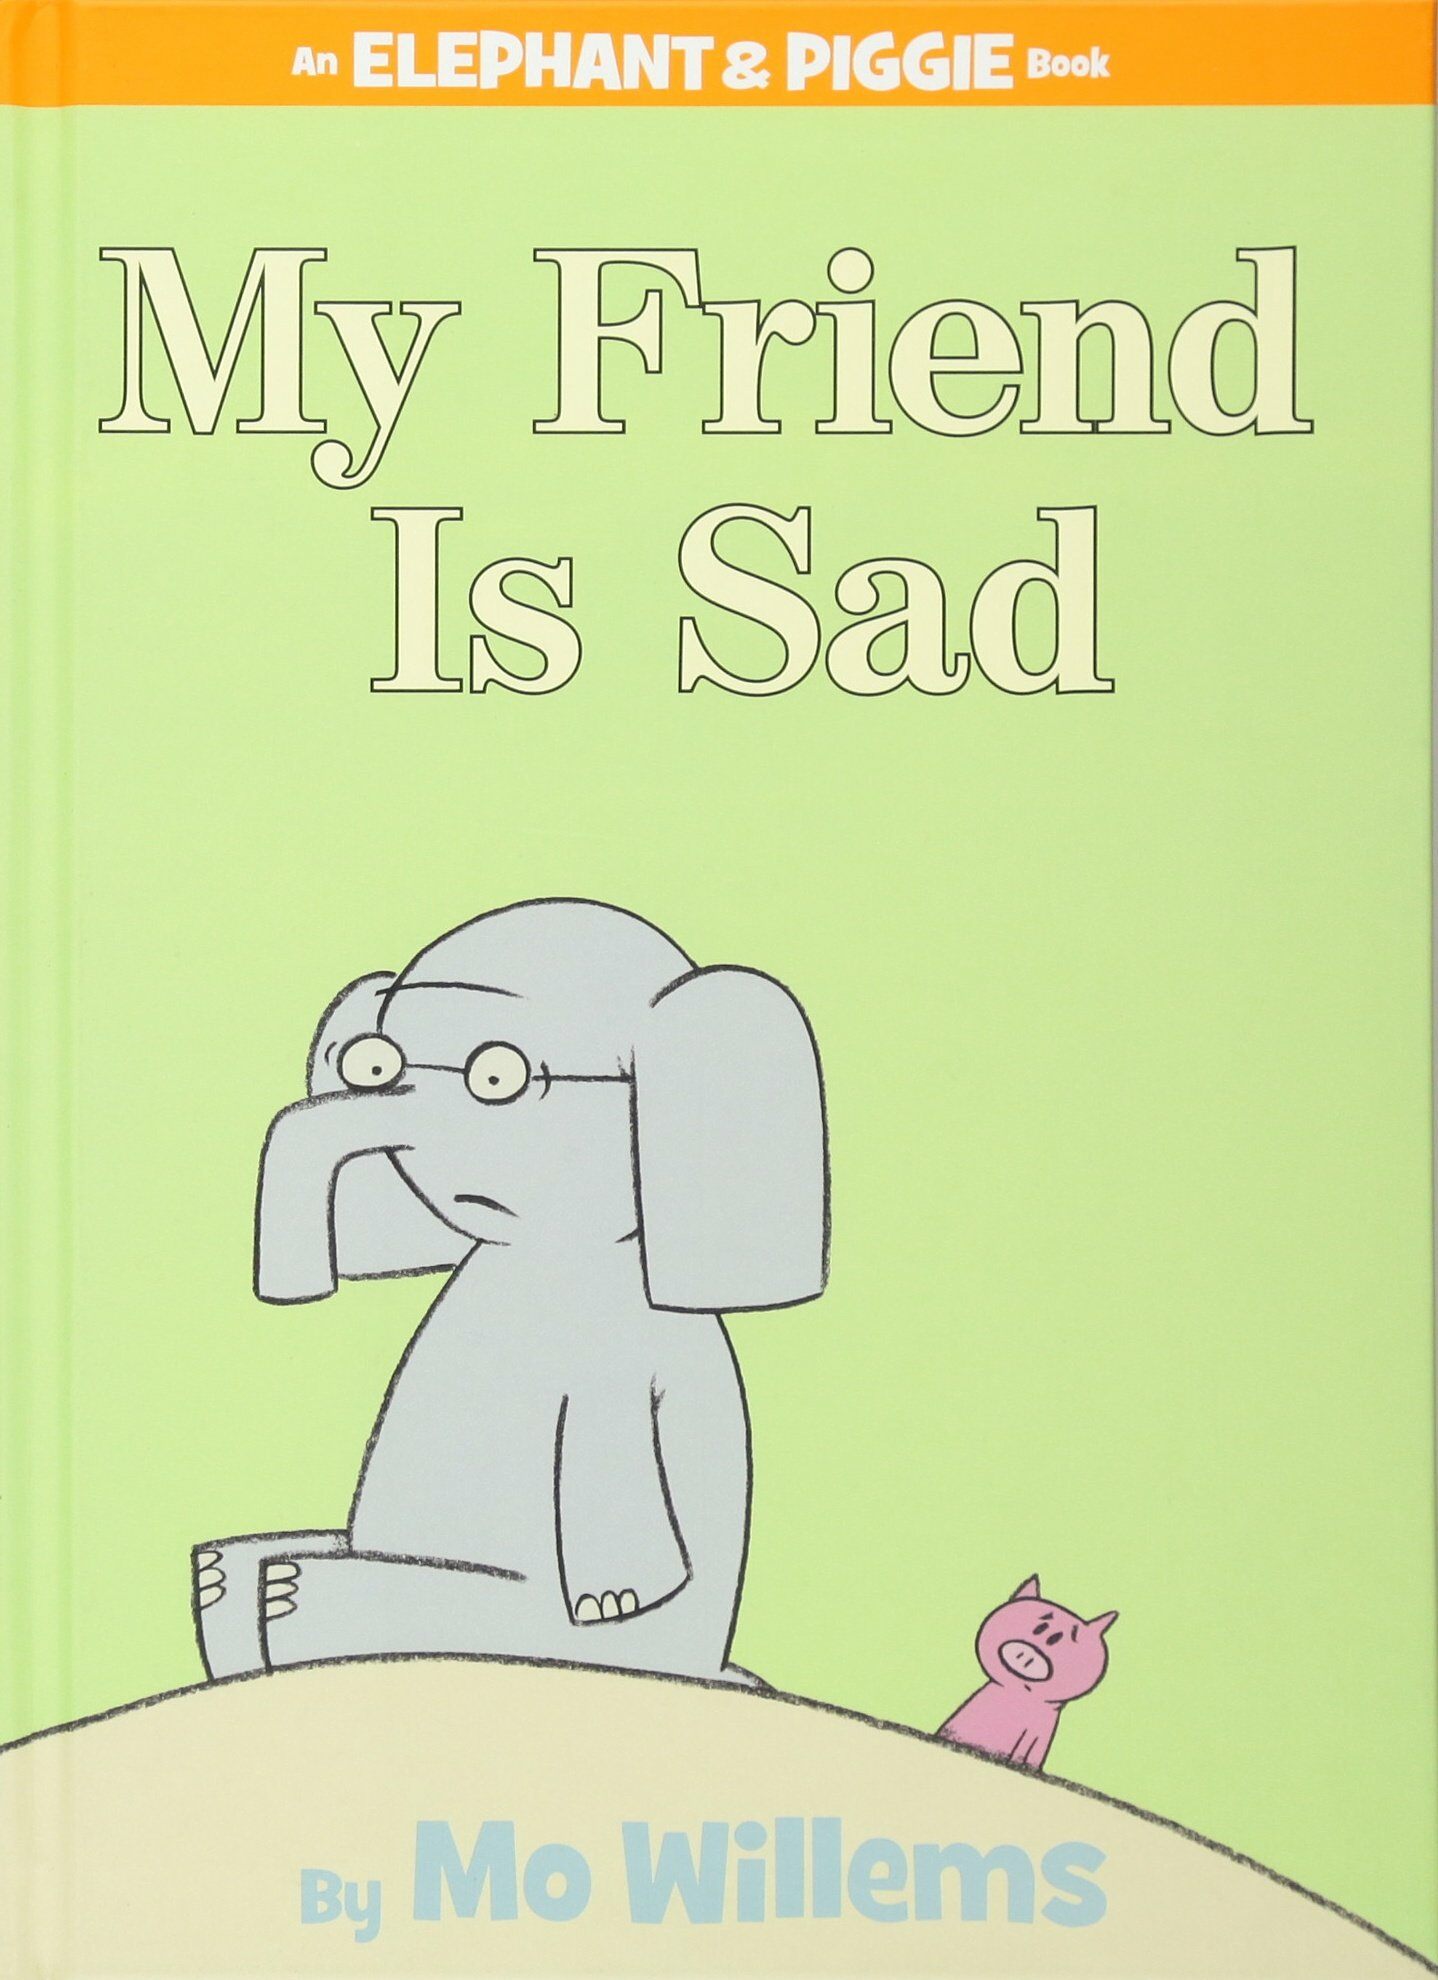 My Friend Is Sad-An Elephant and Piggie Book (Hardcover)